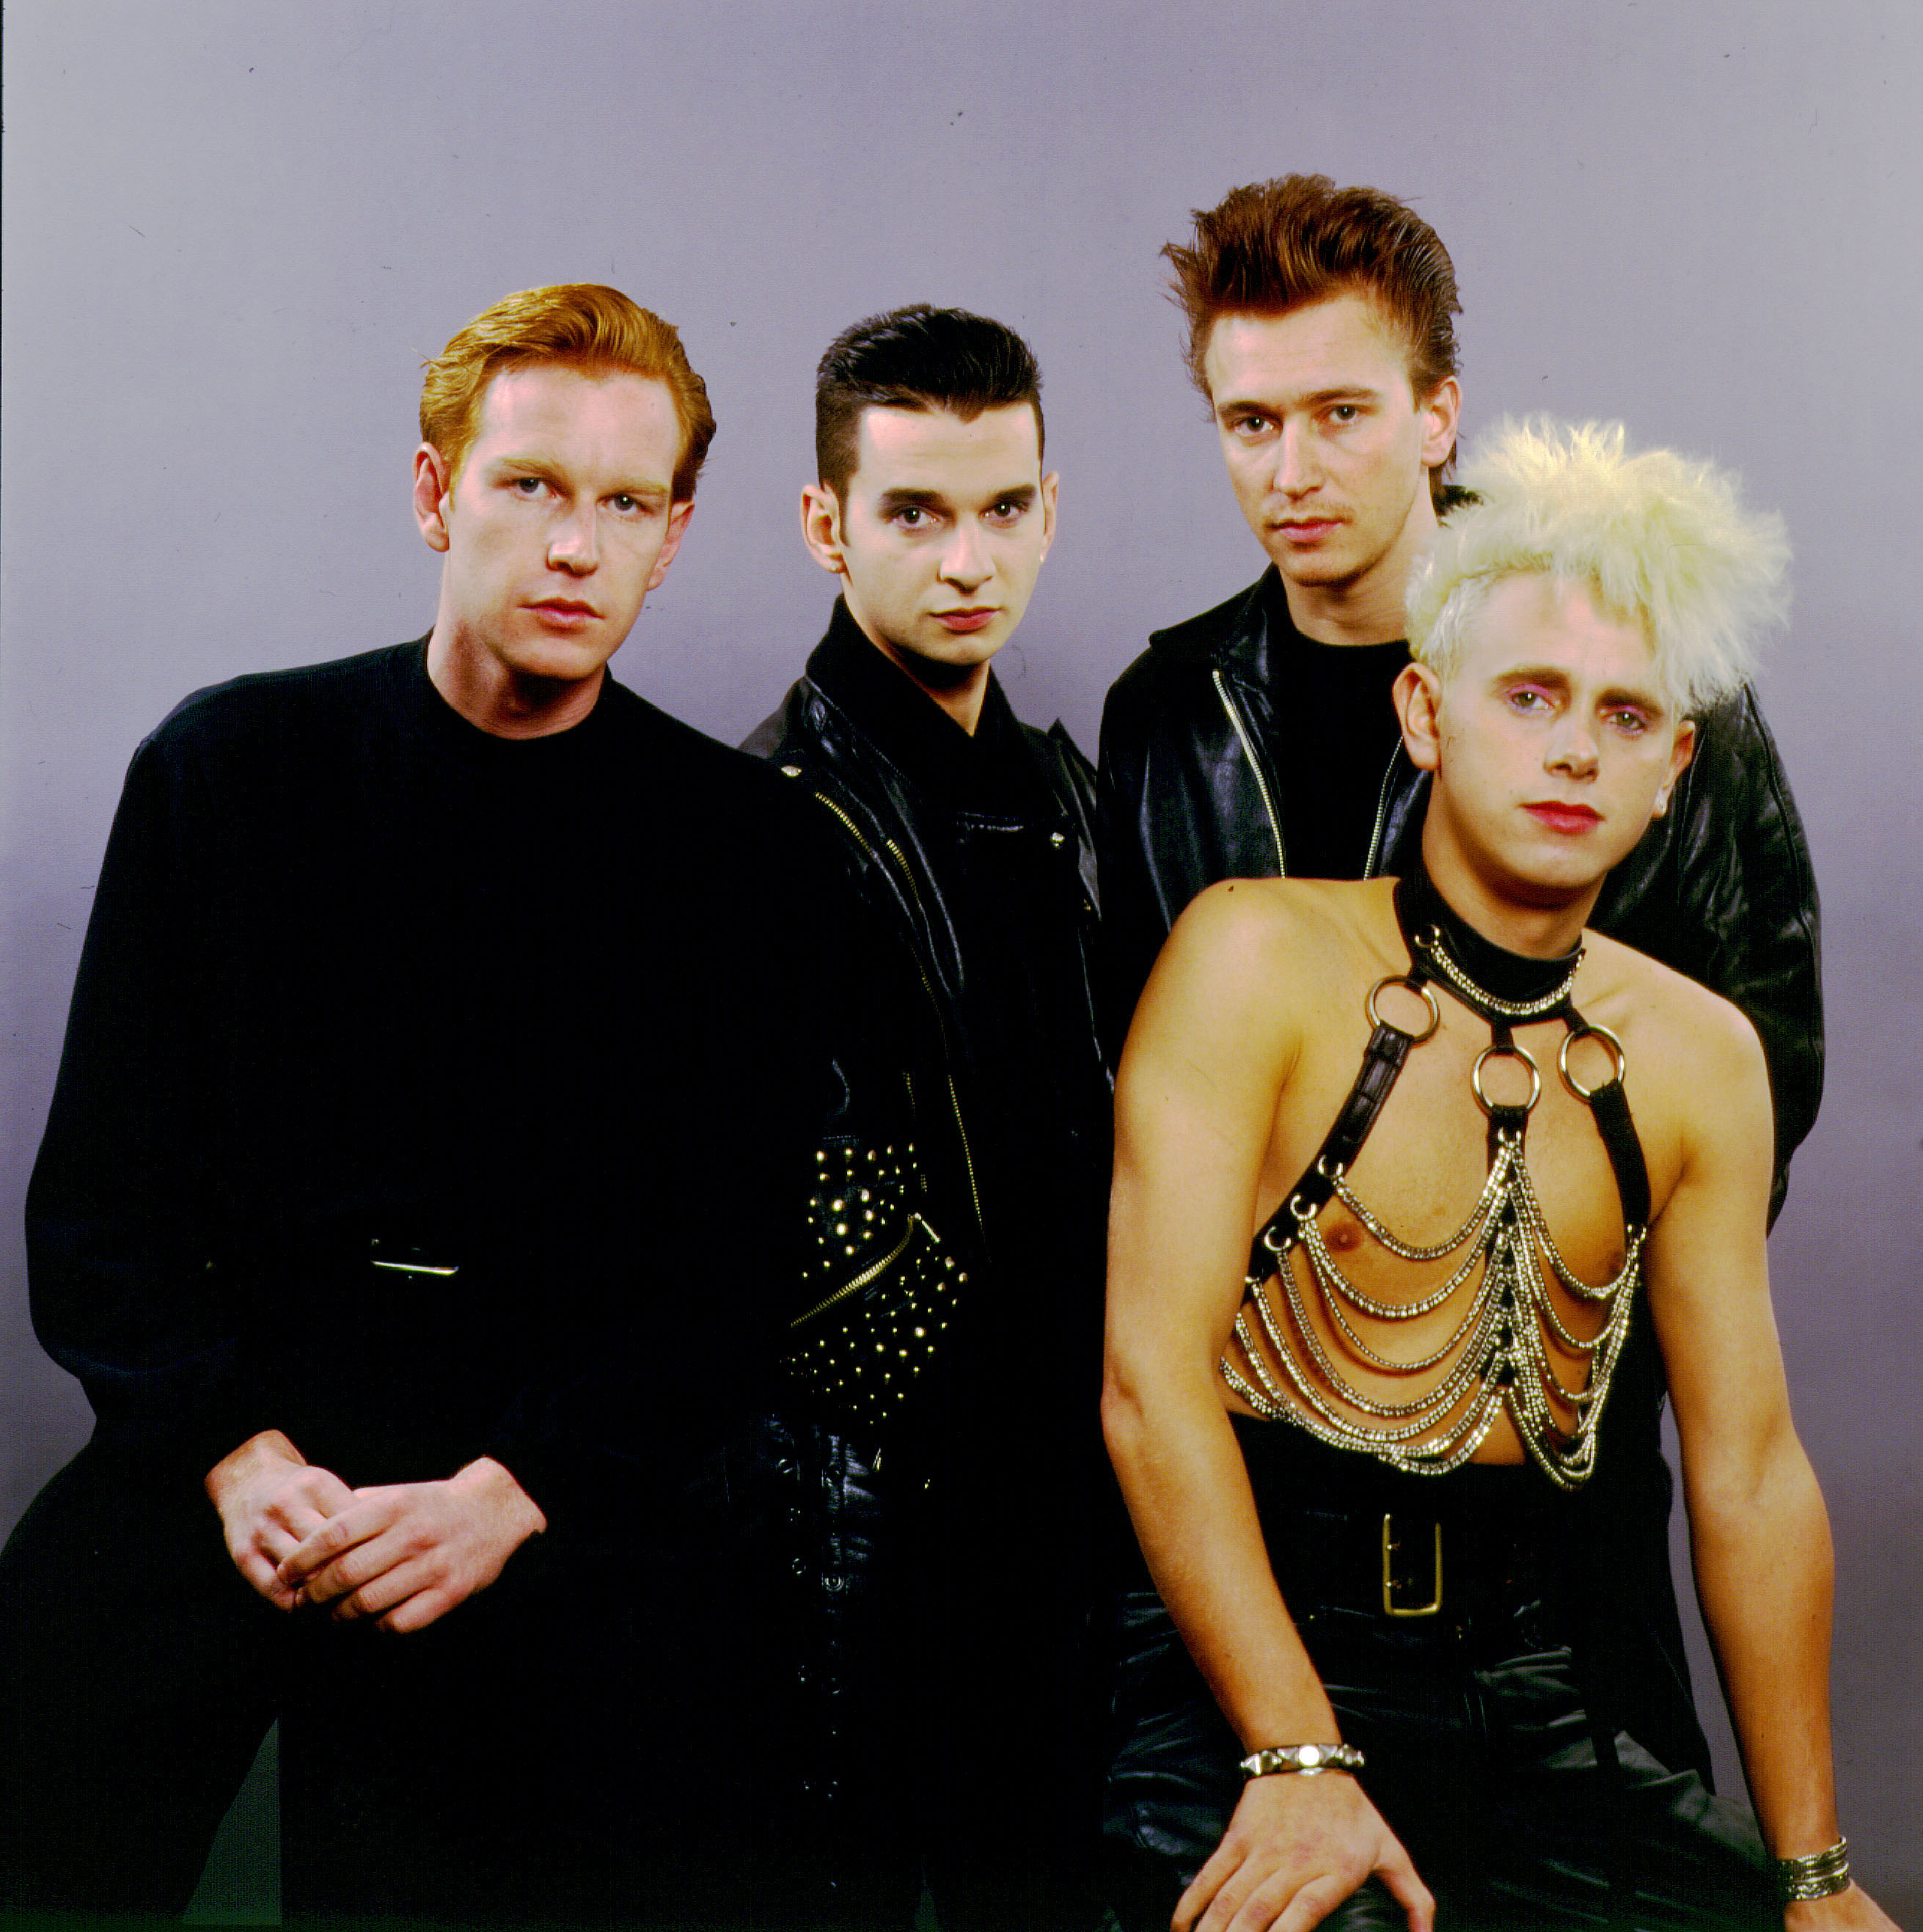 Can you place the dates of Depeche Mode hits?